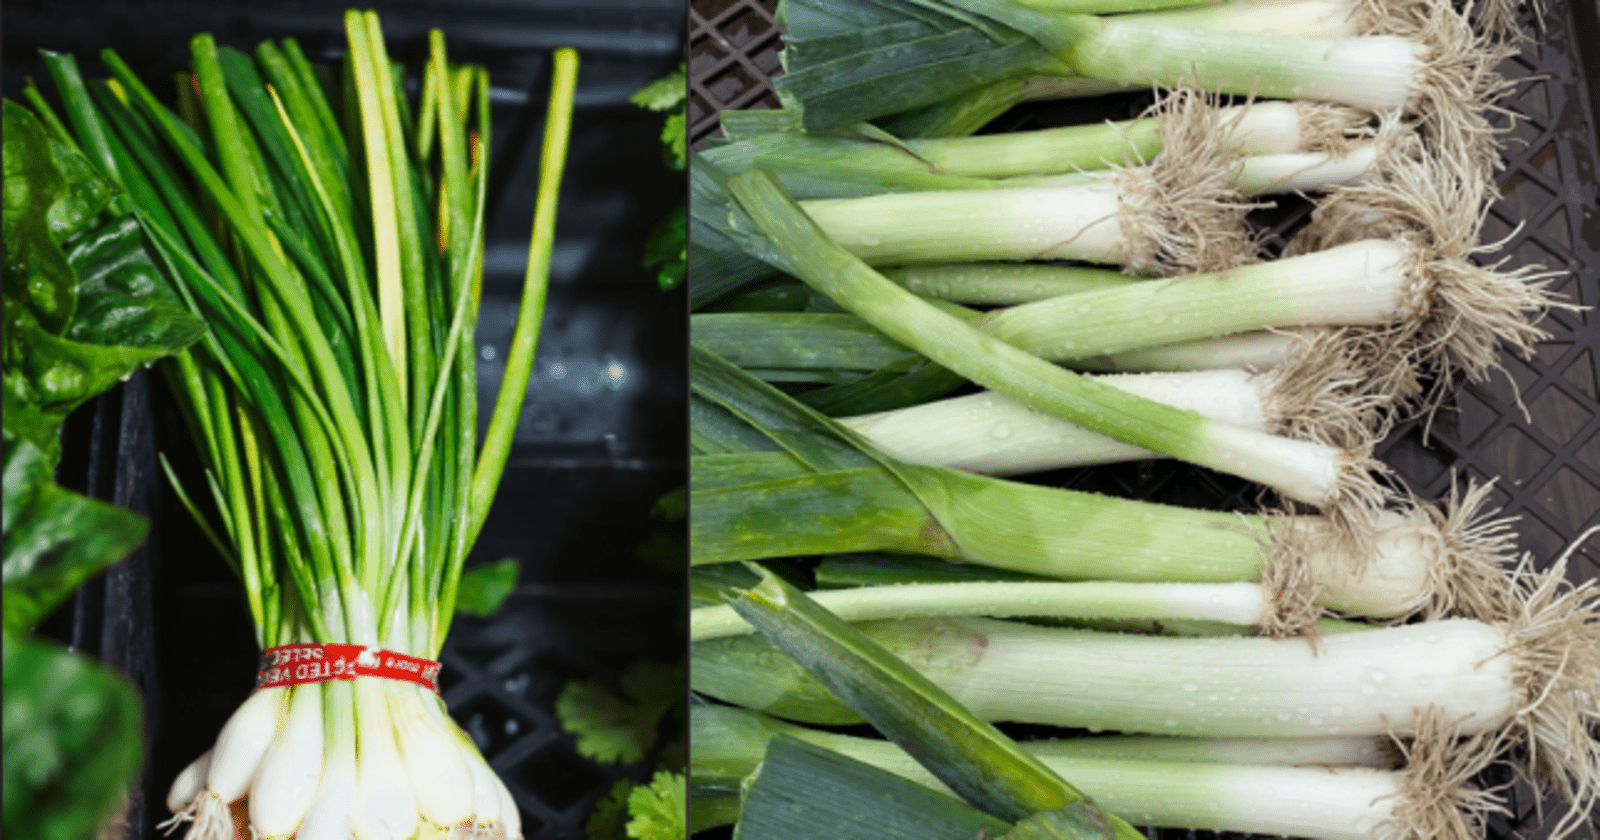 Spring Onion vs Leeks: A Comparative Guide to Their Health Benefits